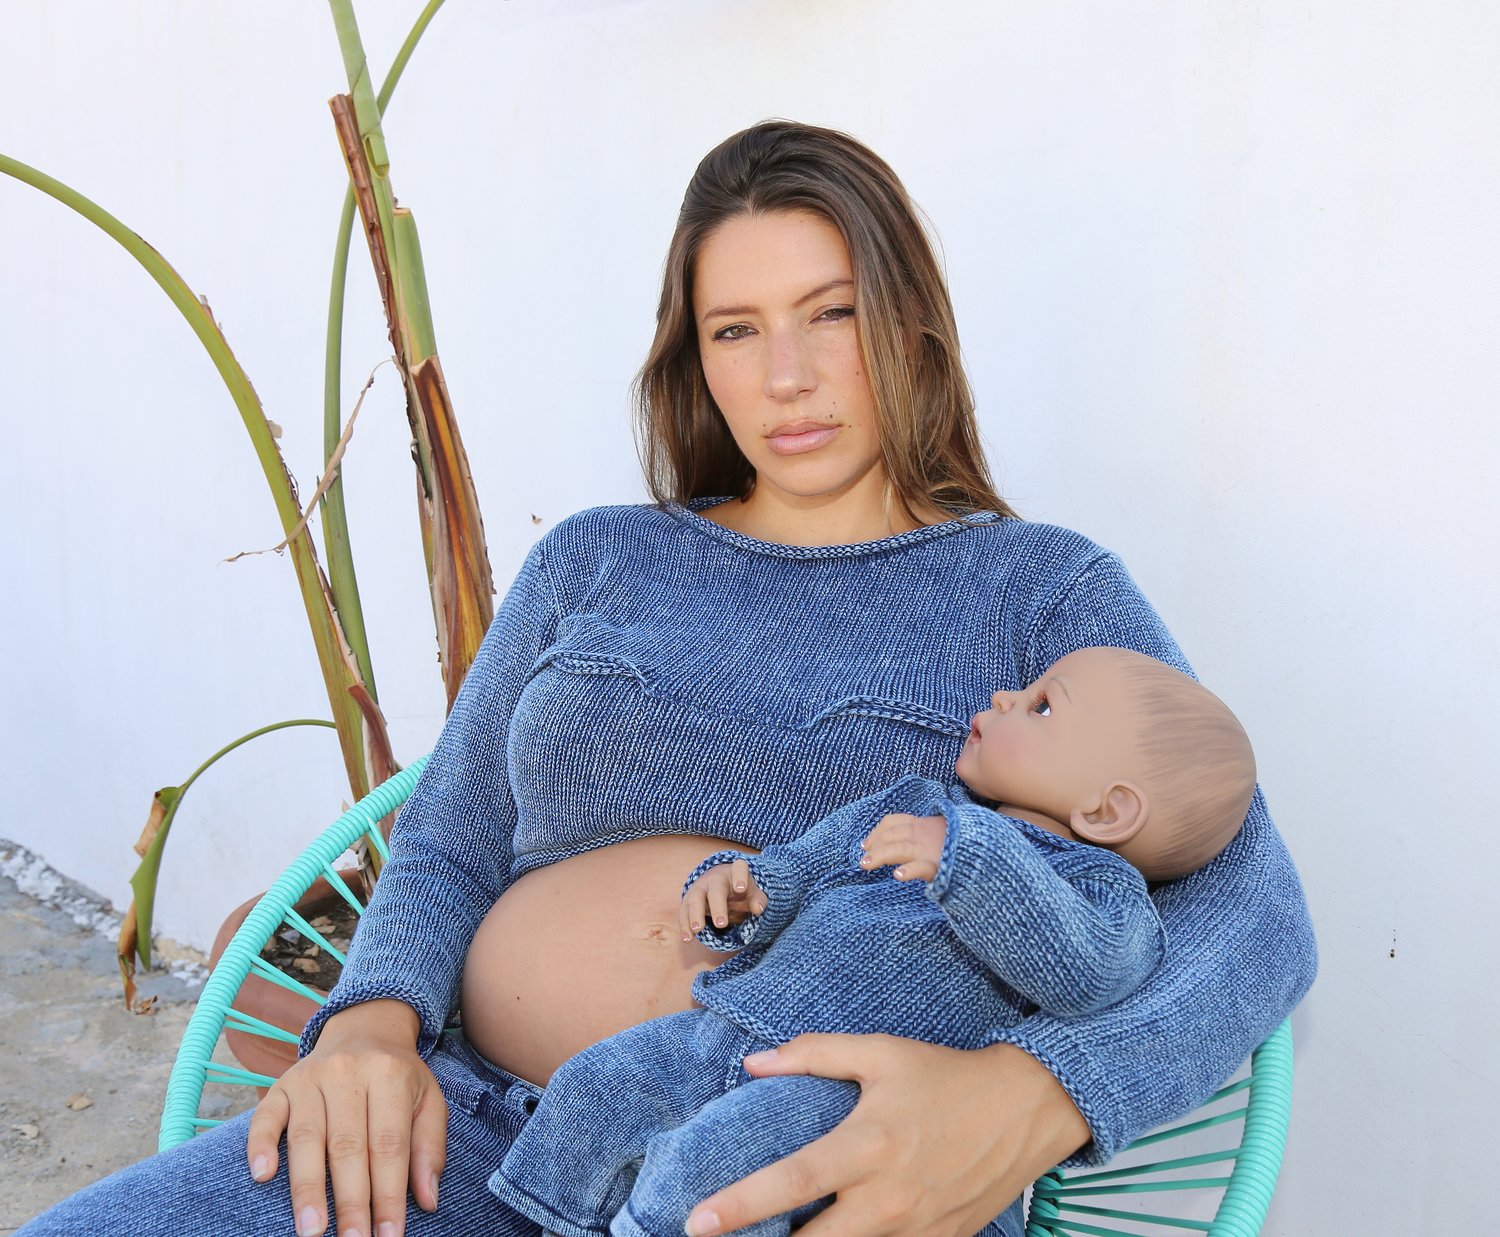 Sylvia Kochinski wearing the new Knorts Mommy and Me breastfeeding sweater with matching Knorts baby, Knorman.